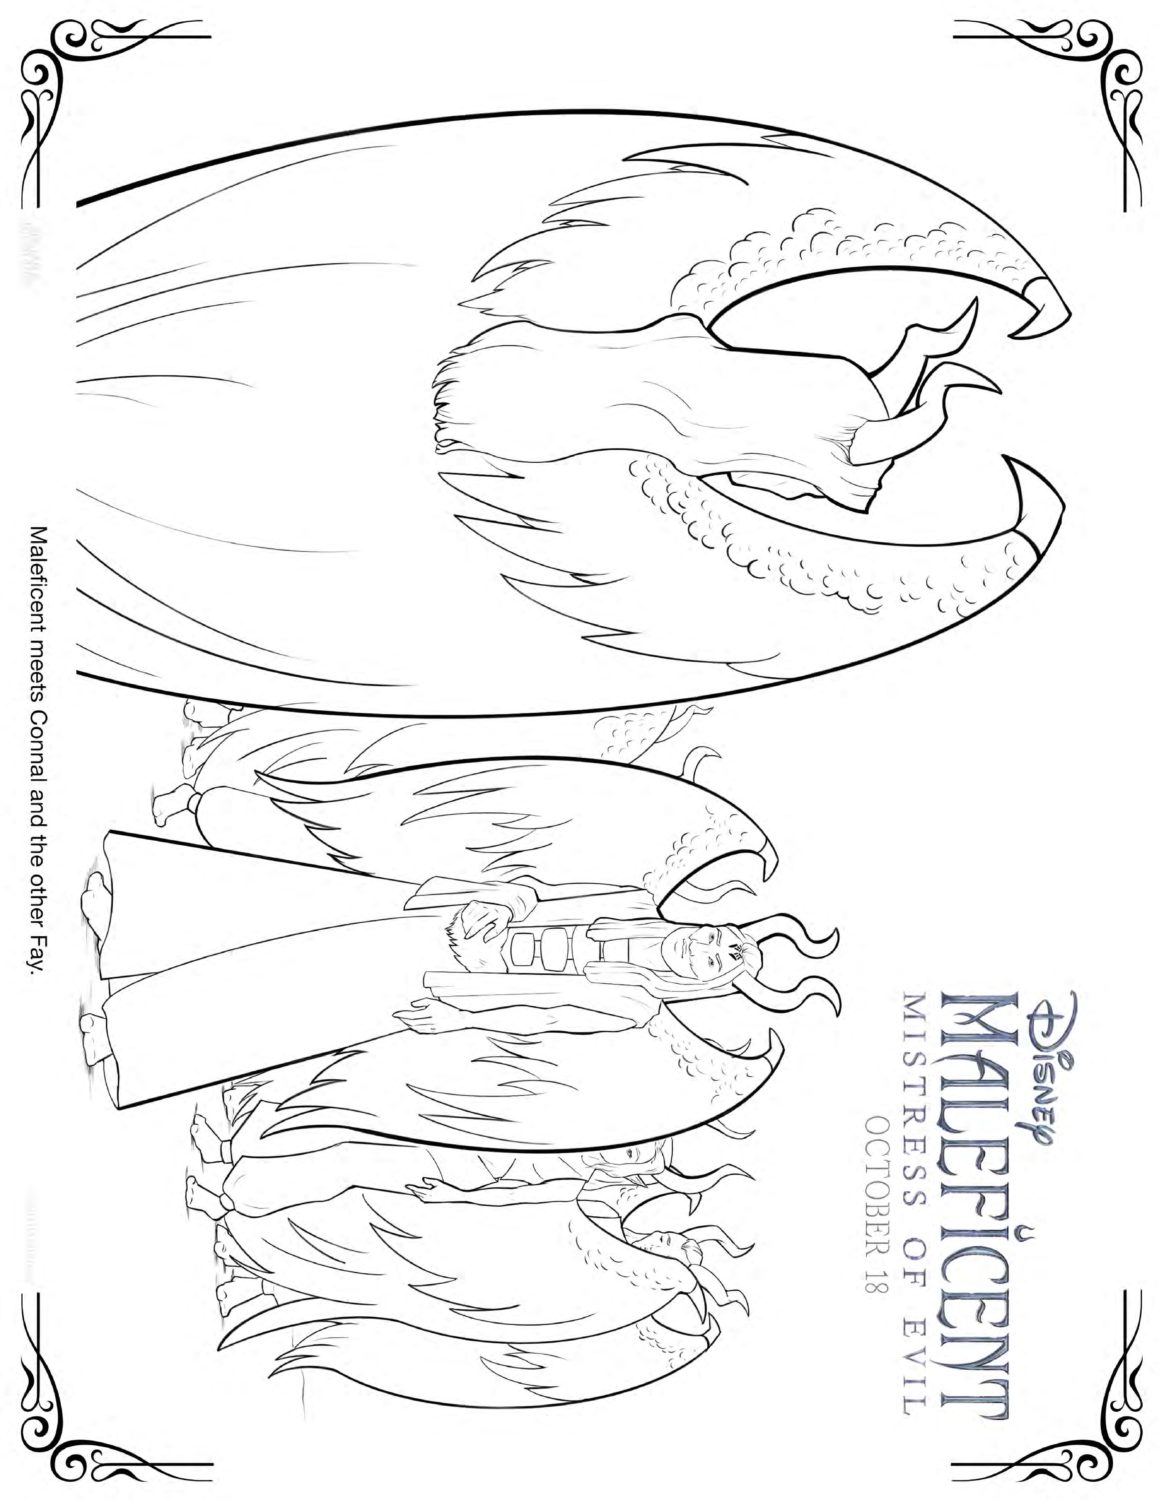 Maleficent 2 Connal Coloring Pages and Activity Sheets